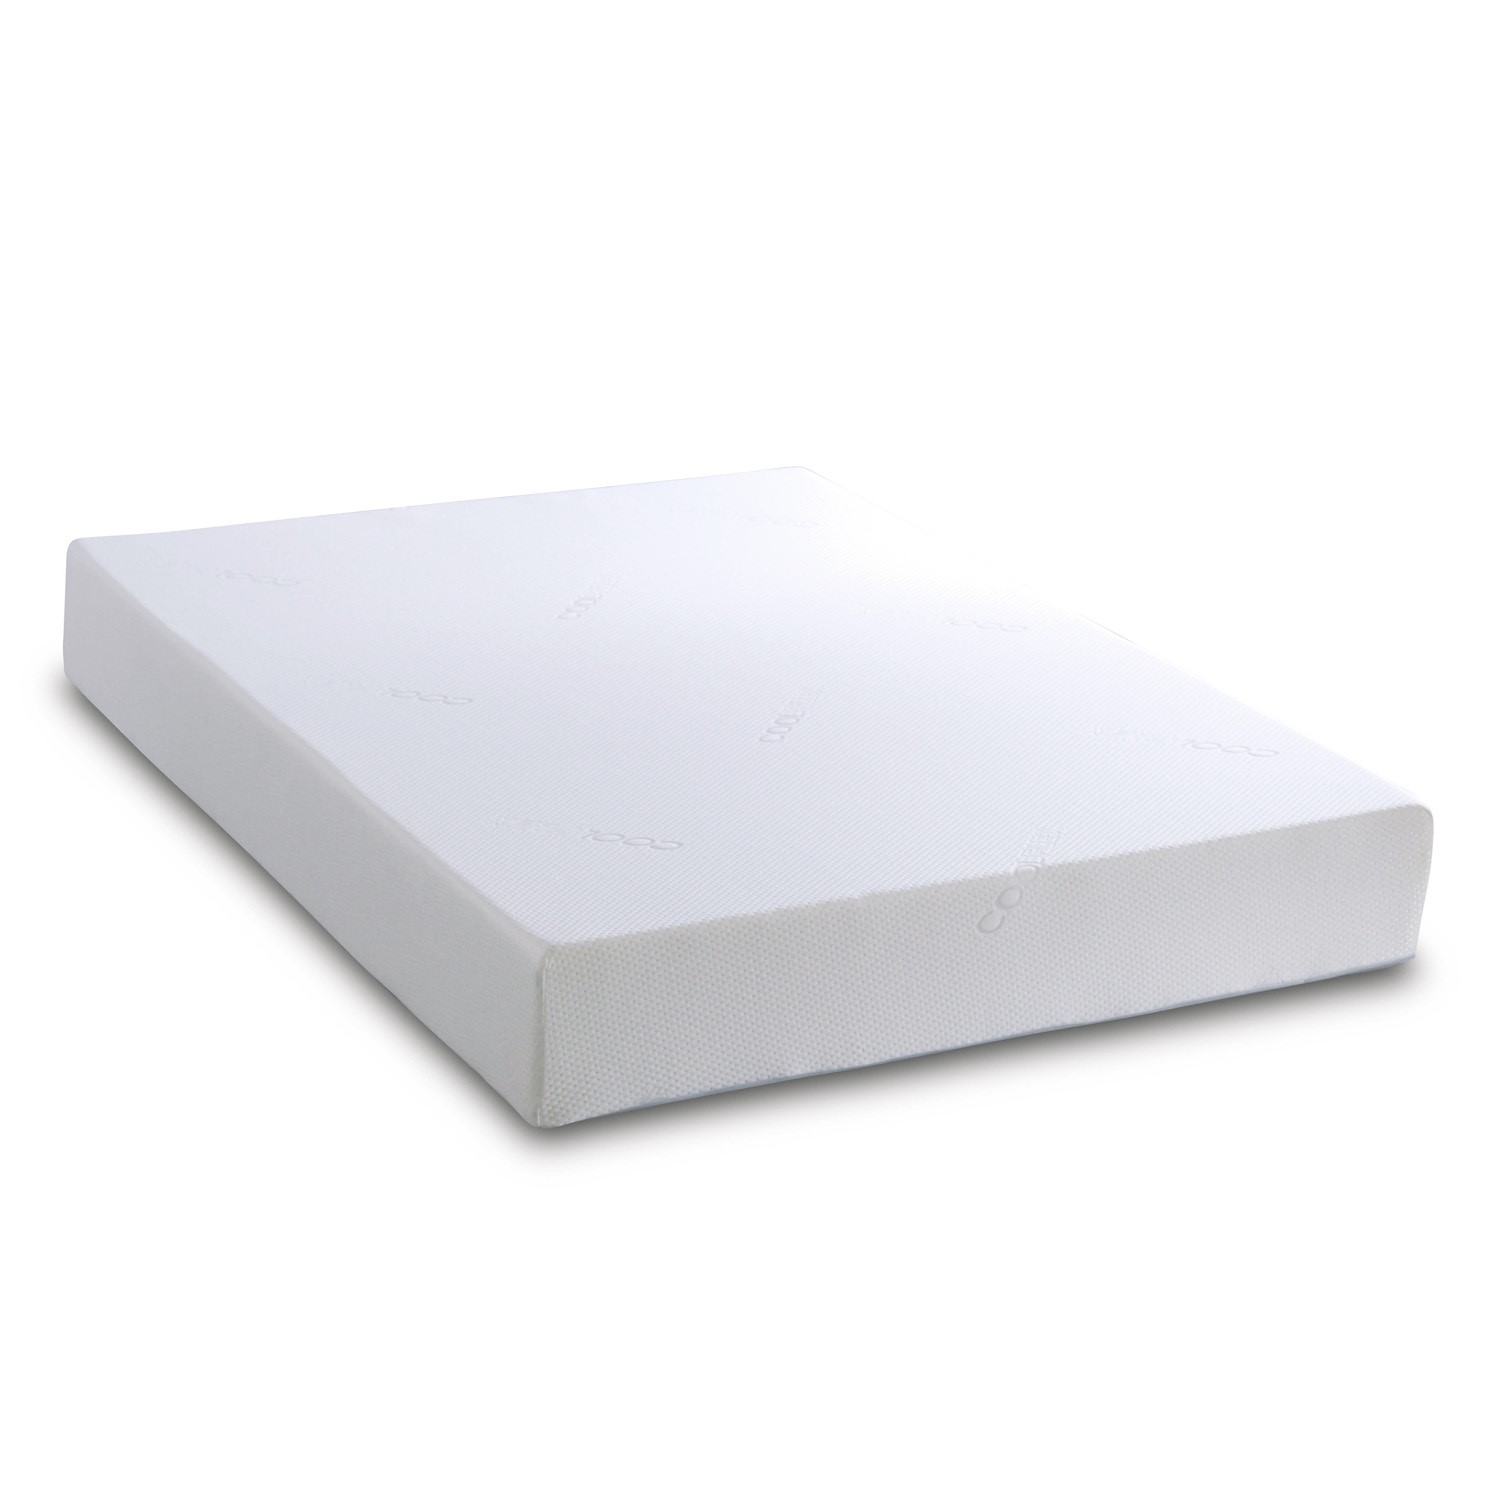 Read more about Double memory foam orthopaedic rolled mattress with removable cover visco therapy